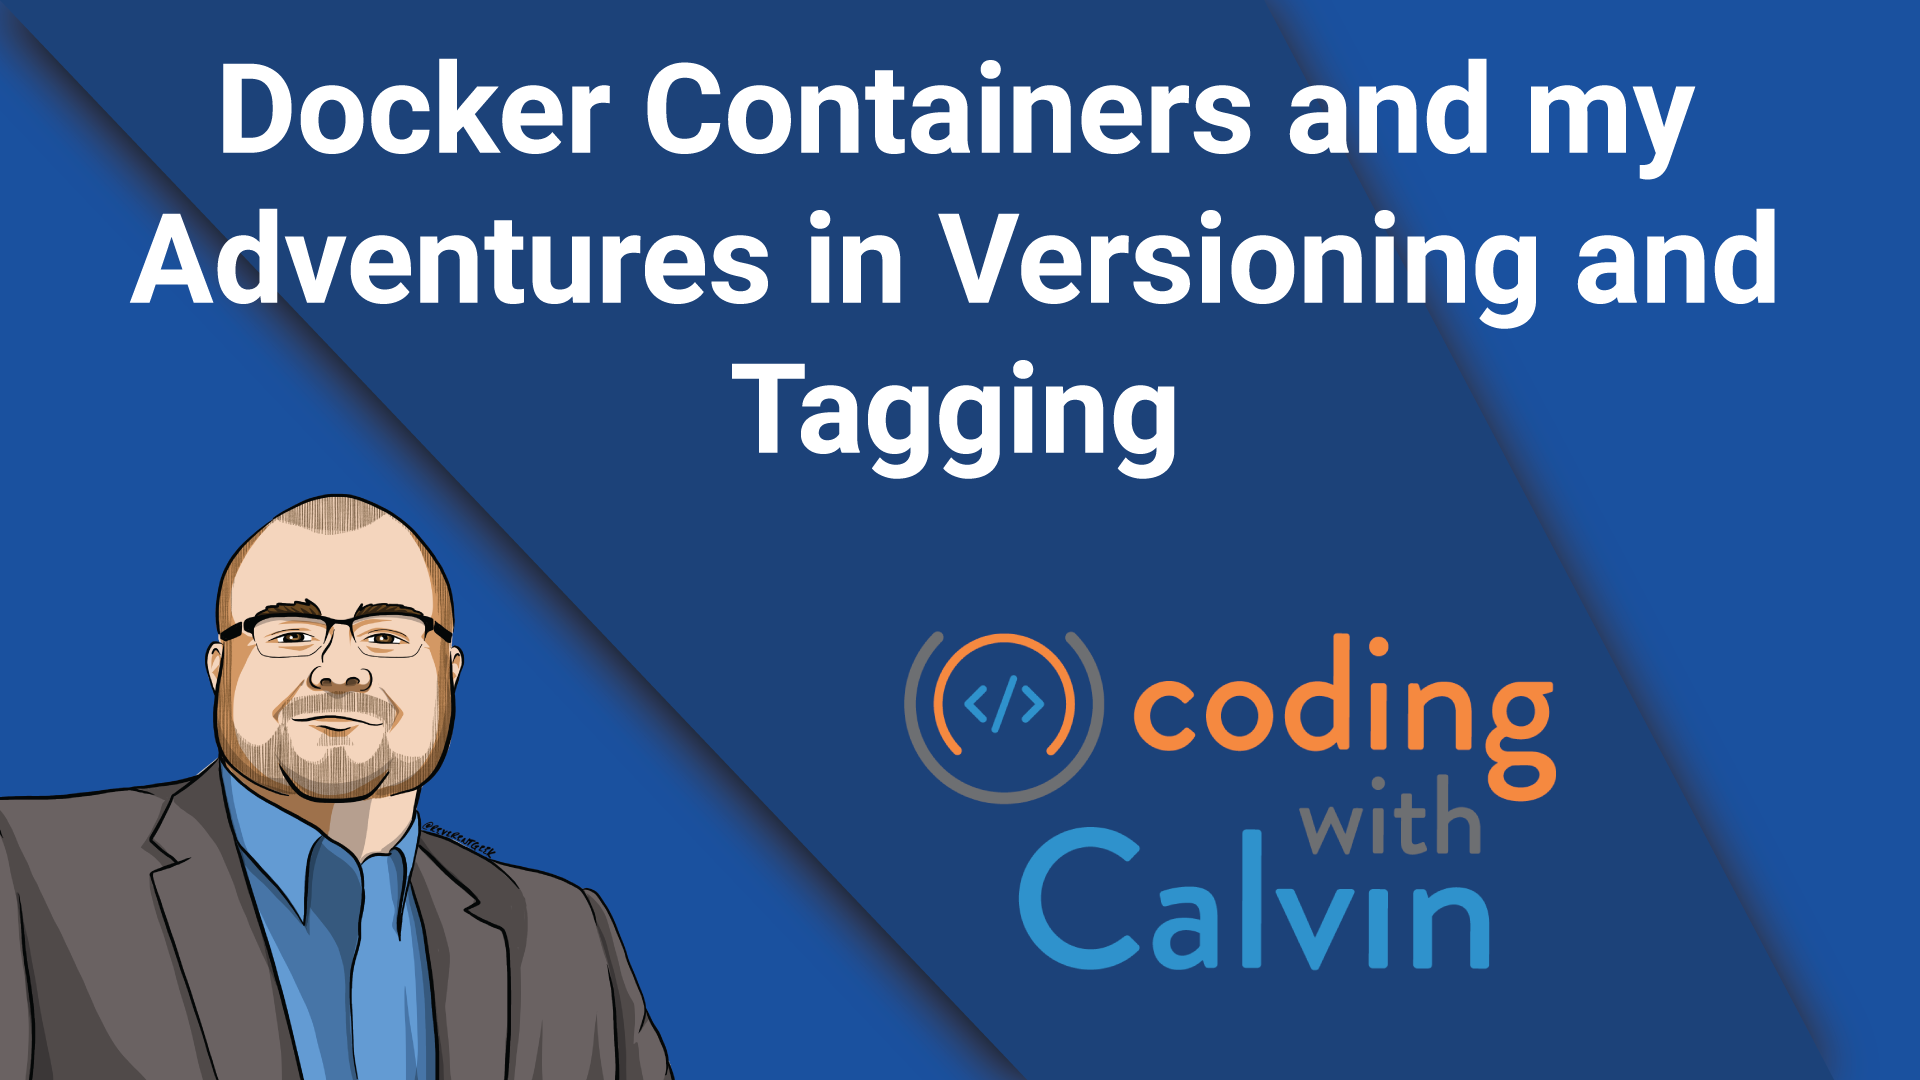 Docker Containers and my Adventures in Versioning and Tagging